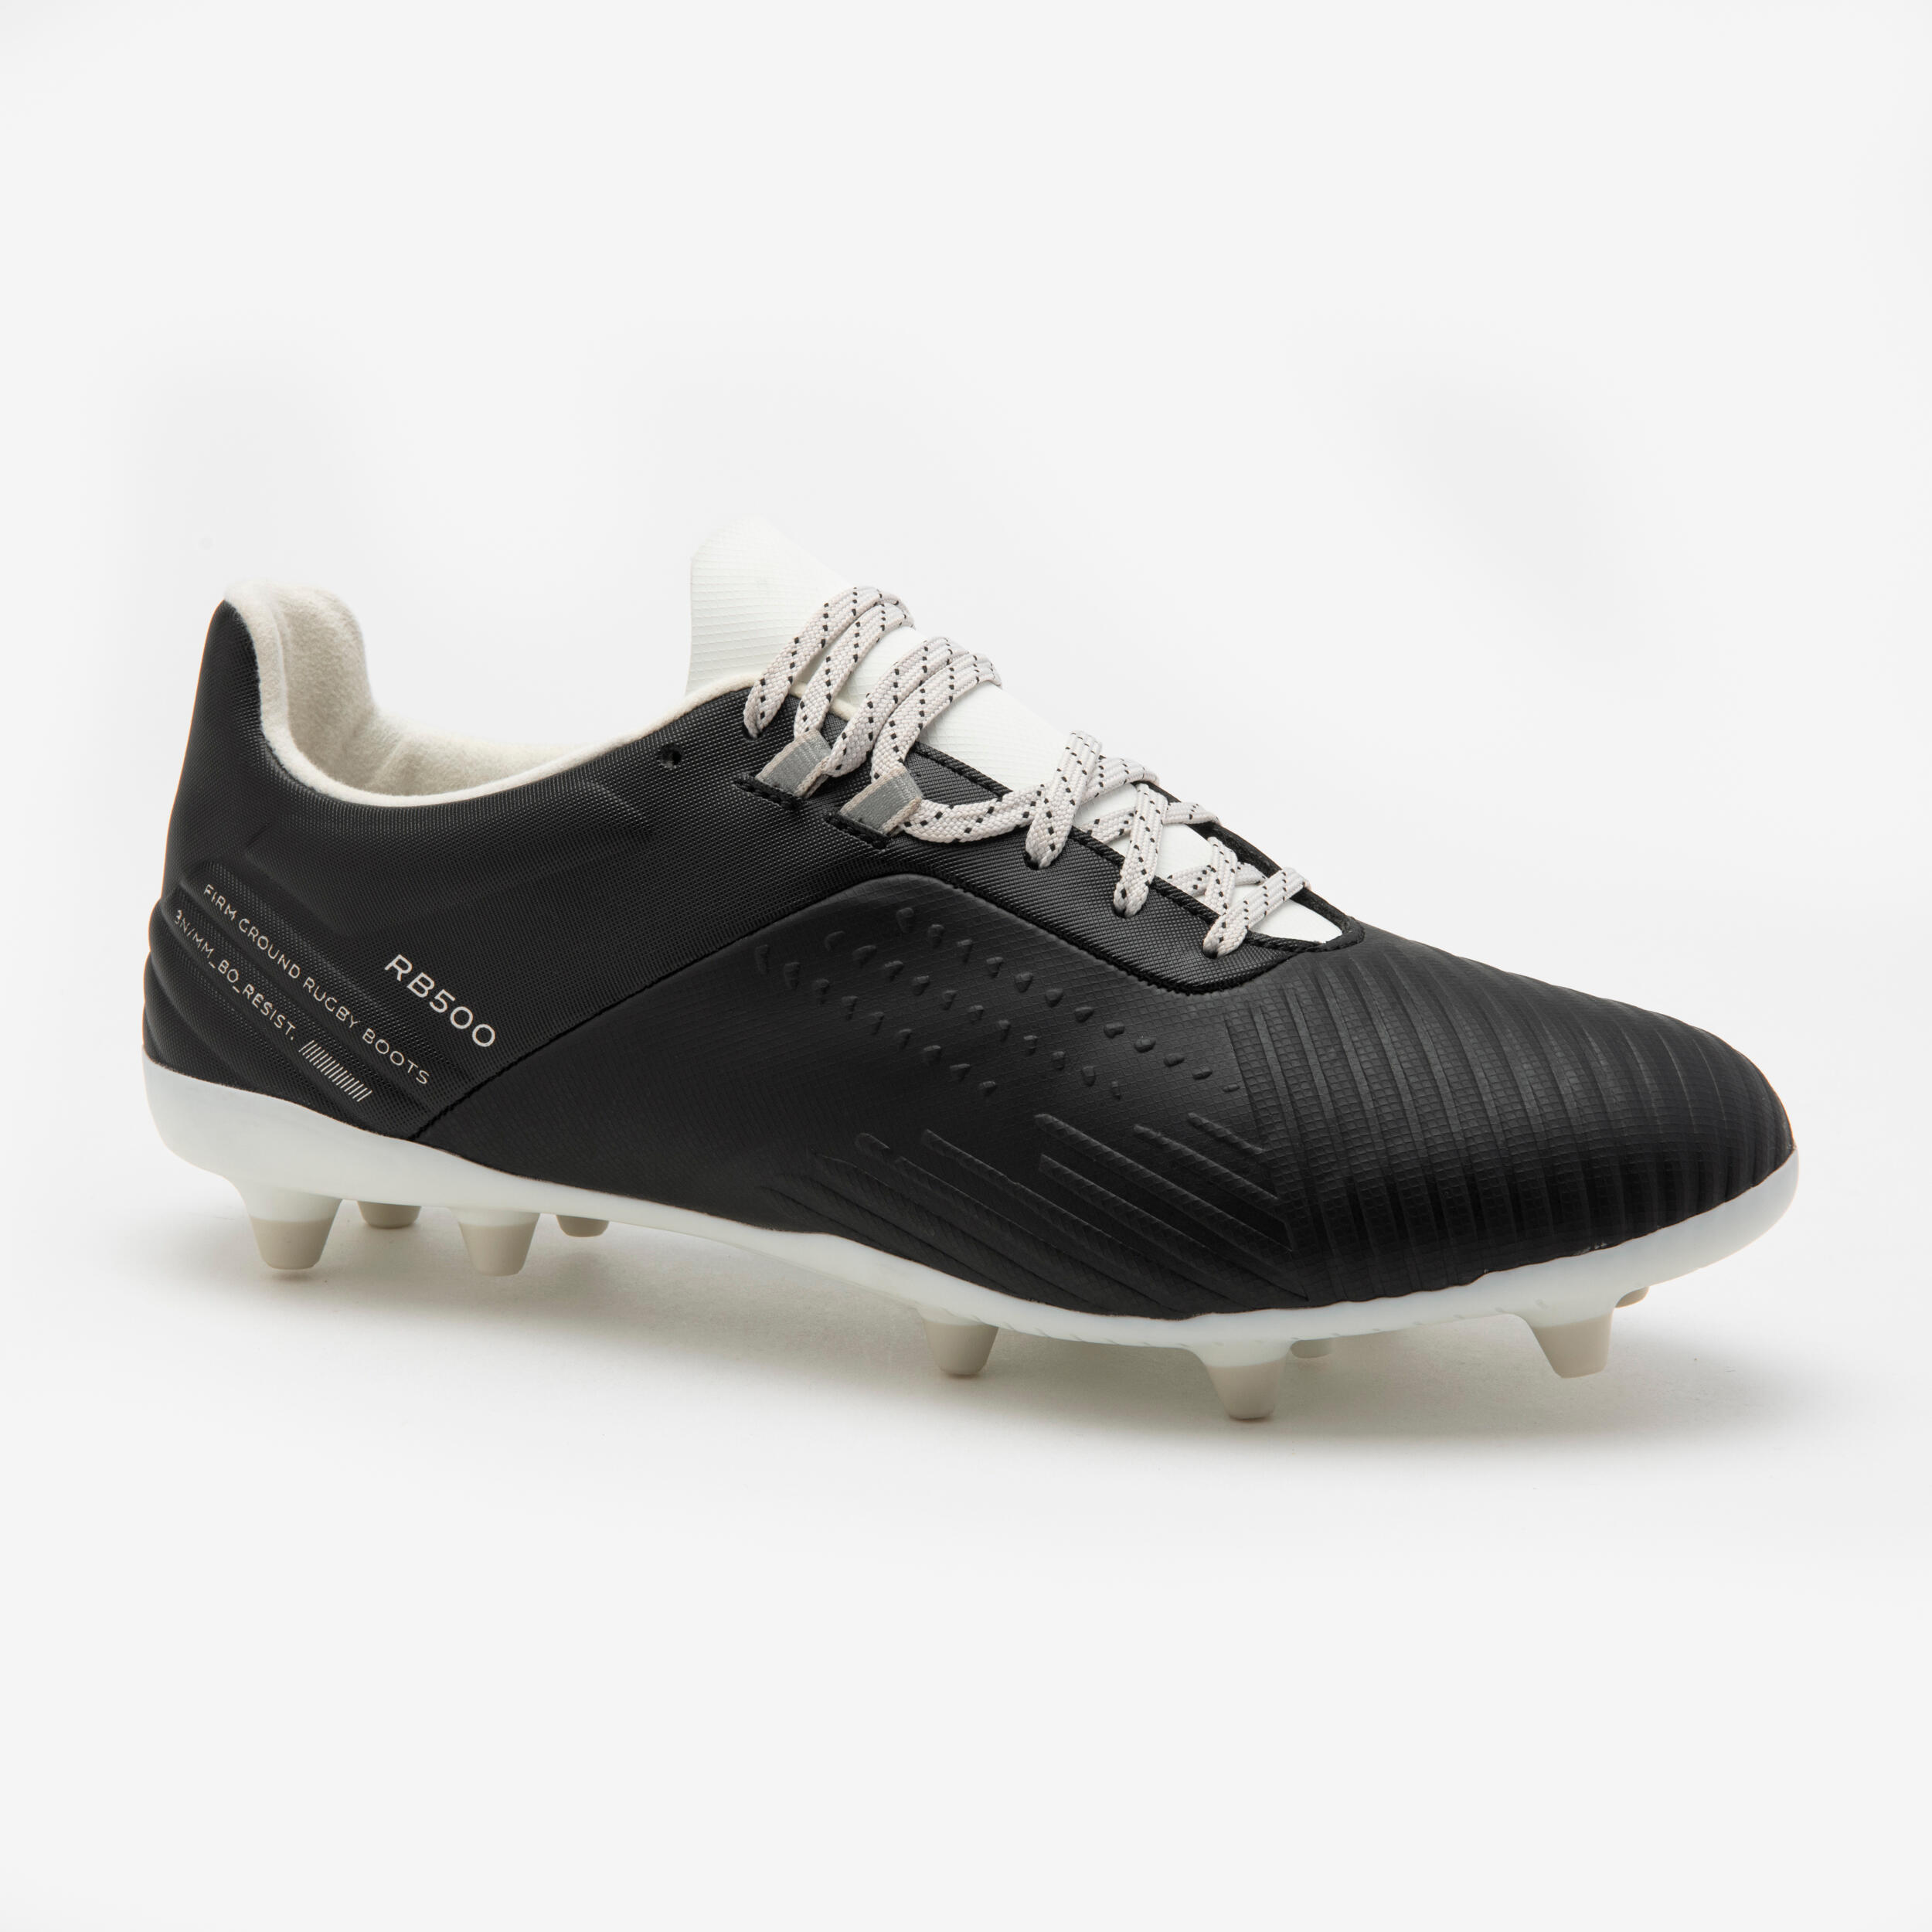 Adult Rugby Boots Advance R500 FG - Black 1/6